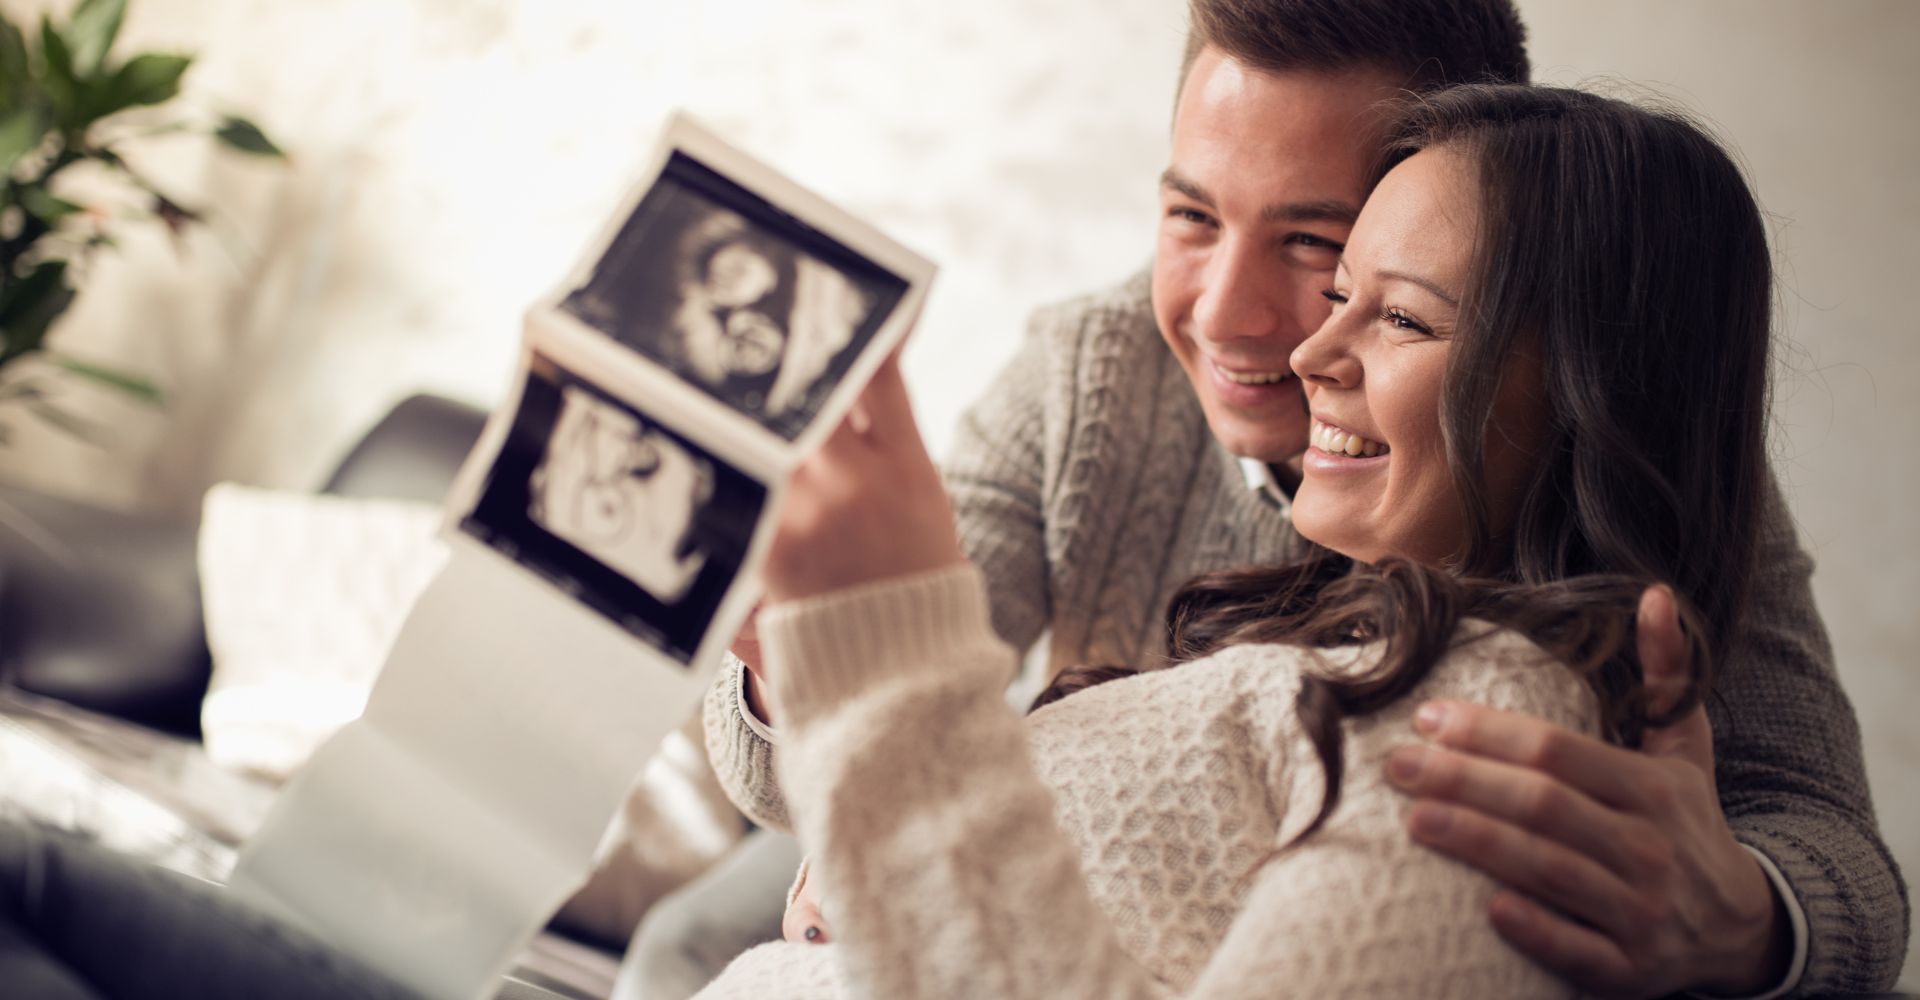 Happy parents look at ultrasound images